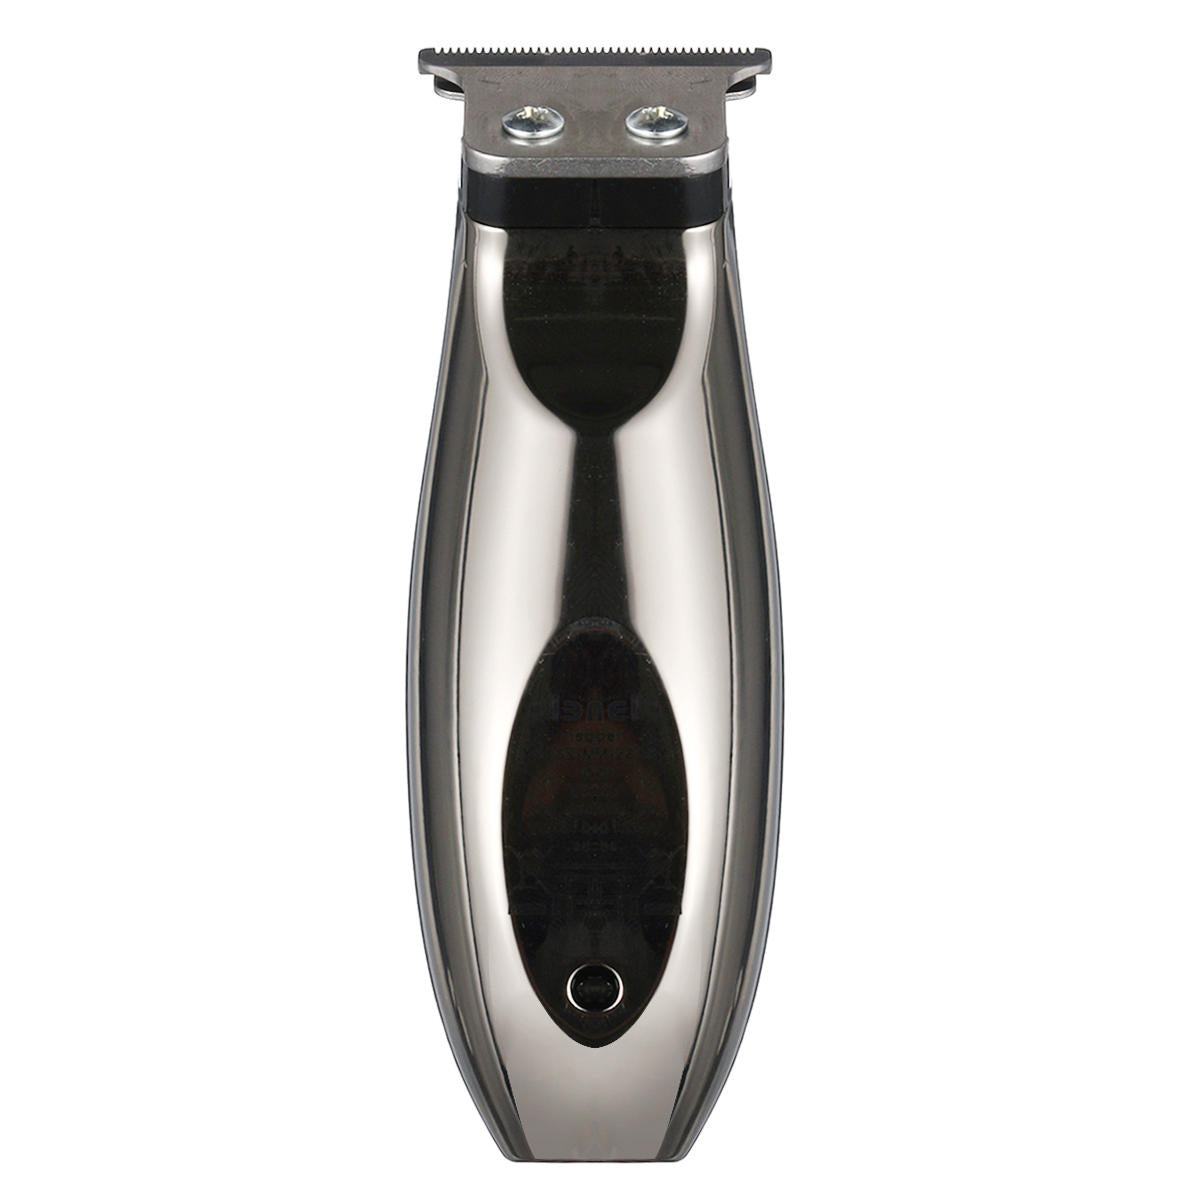 Mini Electric Hair Clippers Cordless Pusher Head Shaver Hair Trimmer Clipper For Men